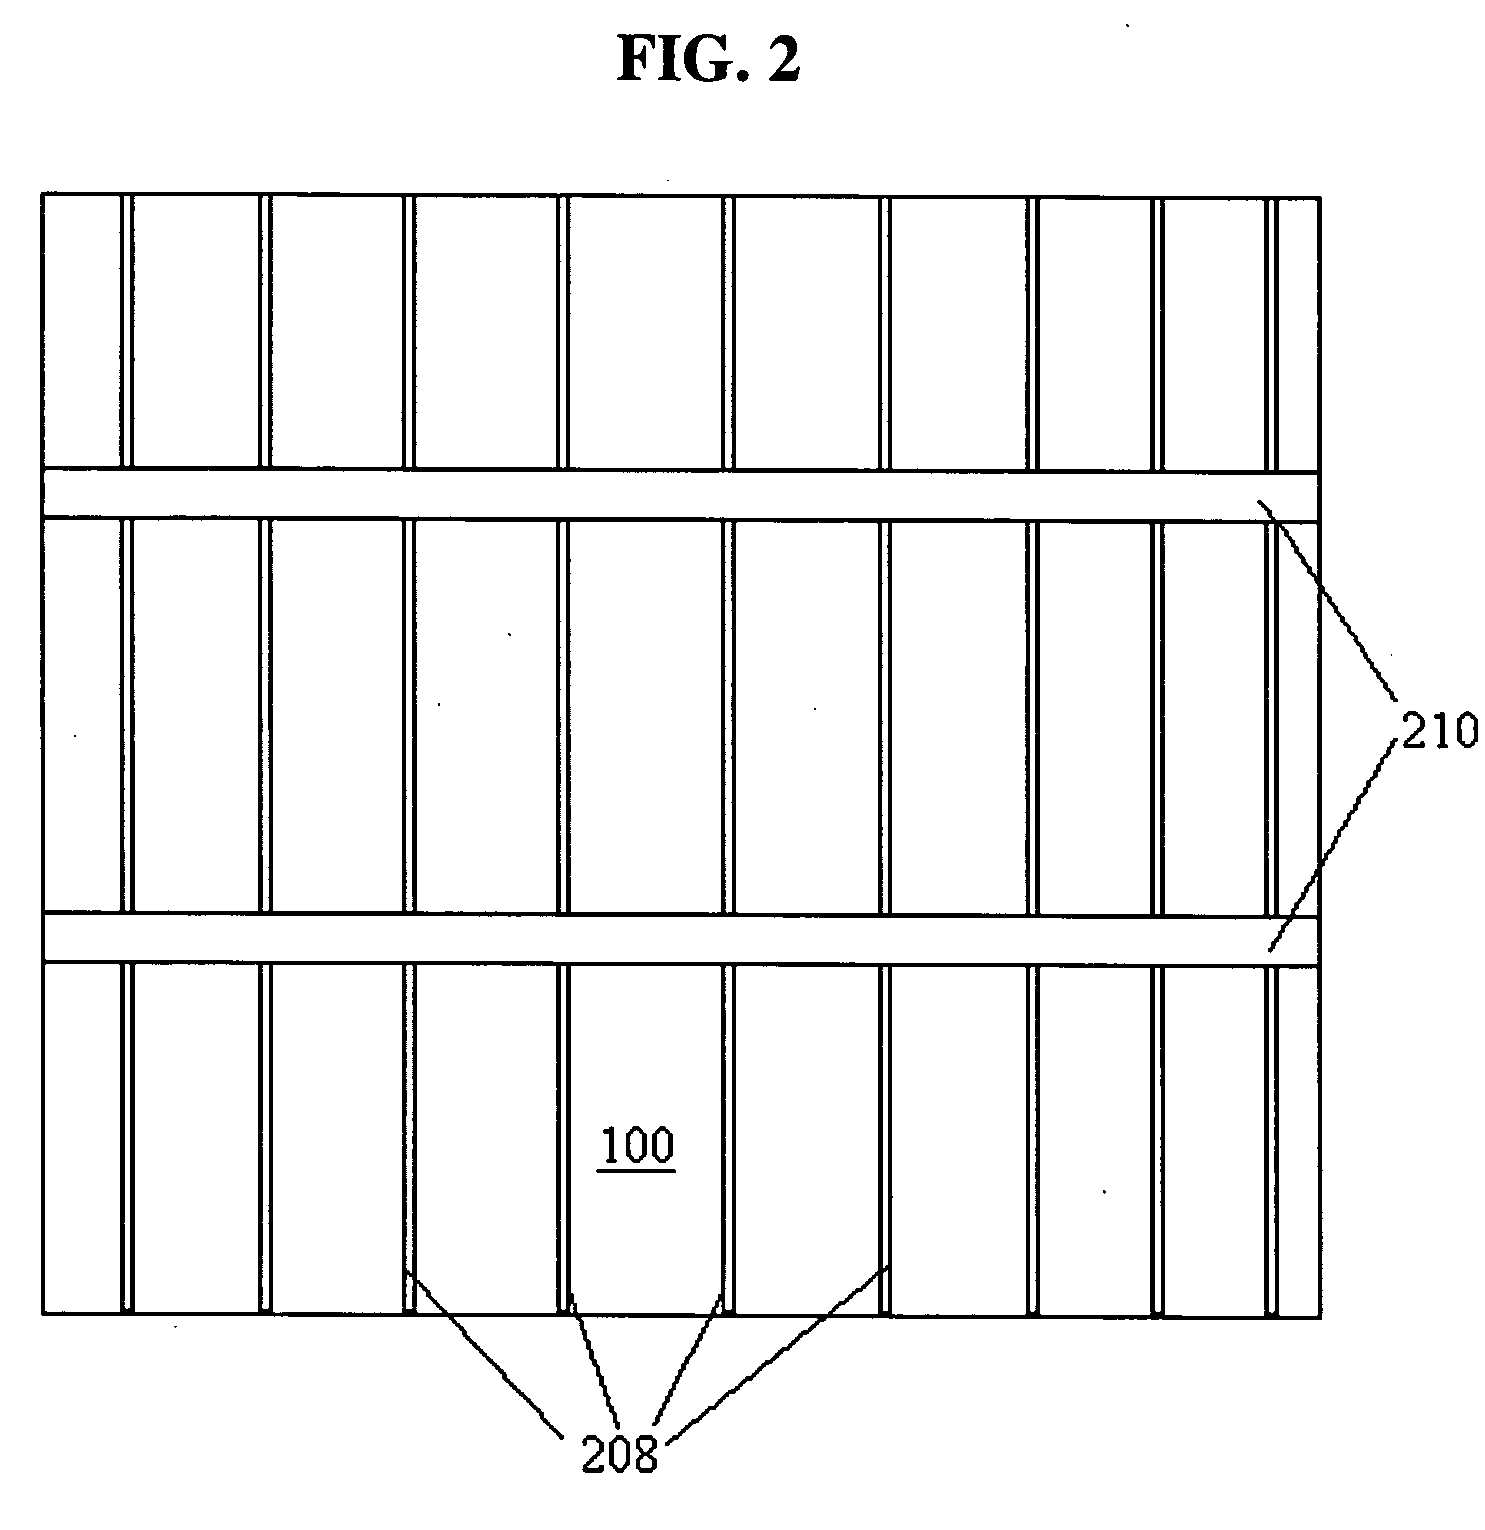 Electroformed stencils for solar cell front side metallization